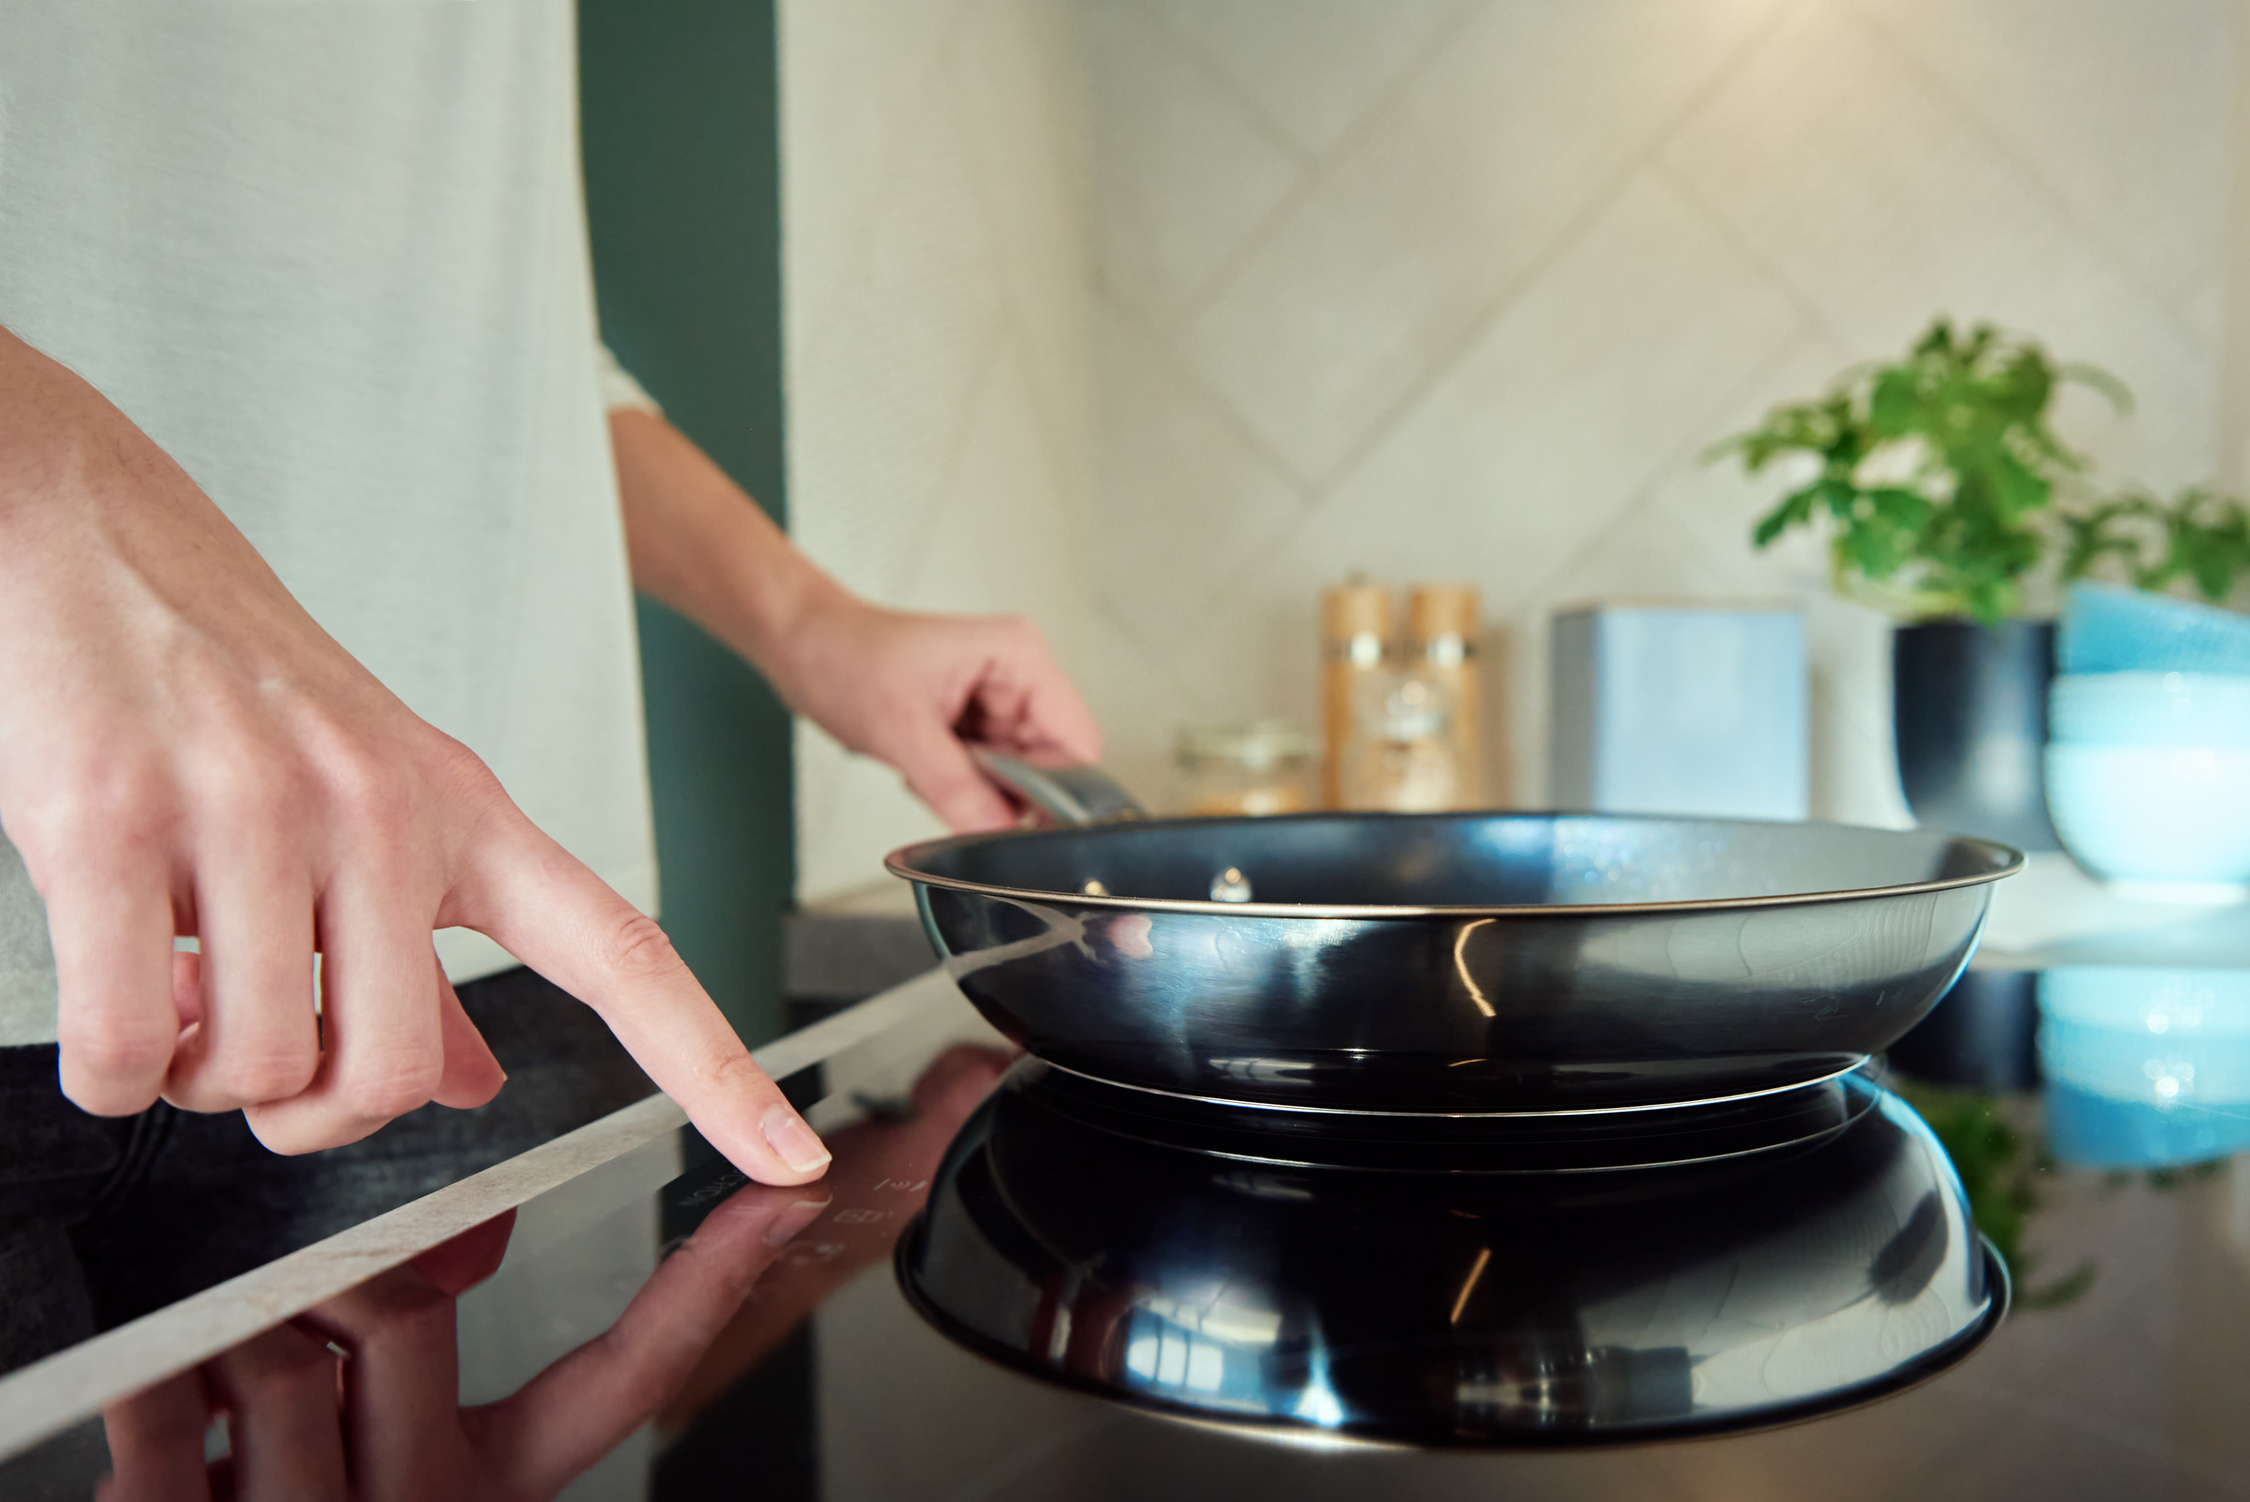 Woman Turn on Induction Hob with Frying Pan